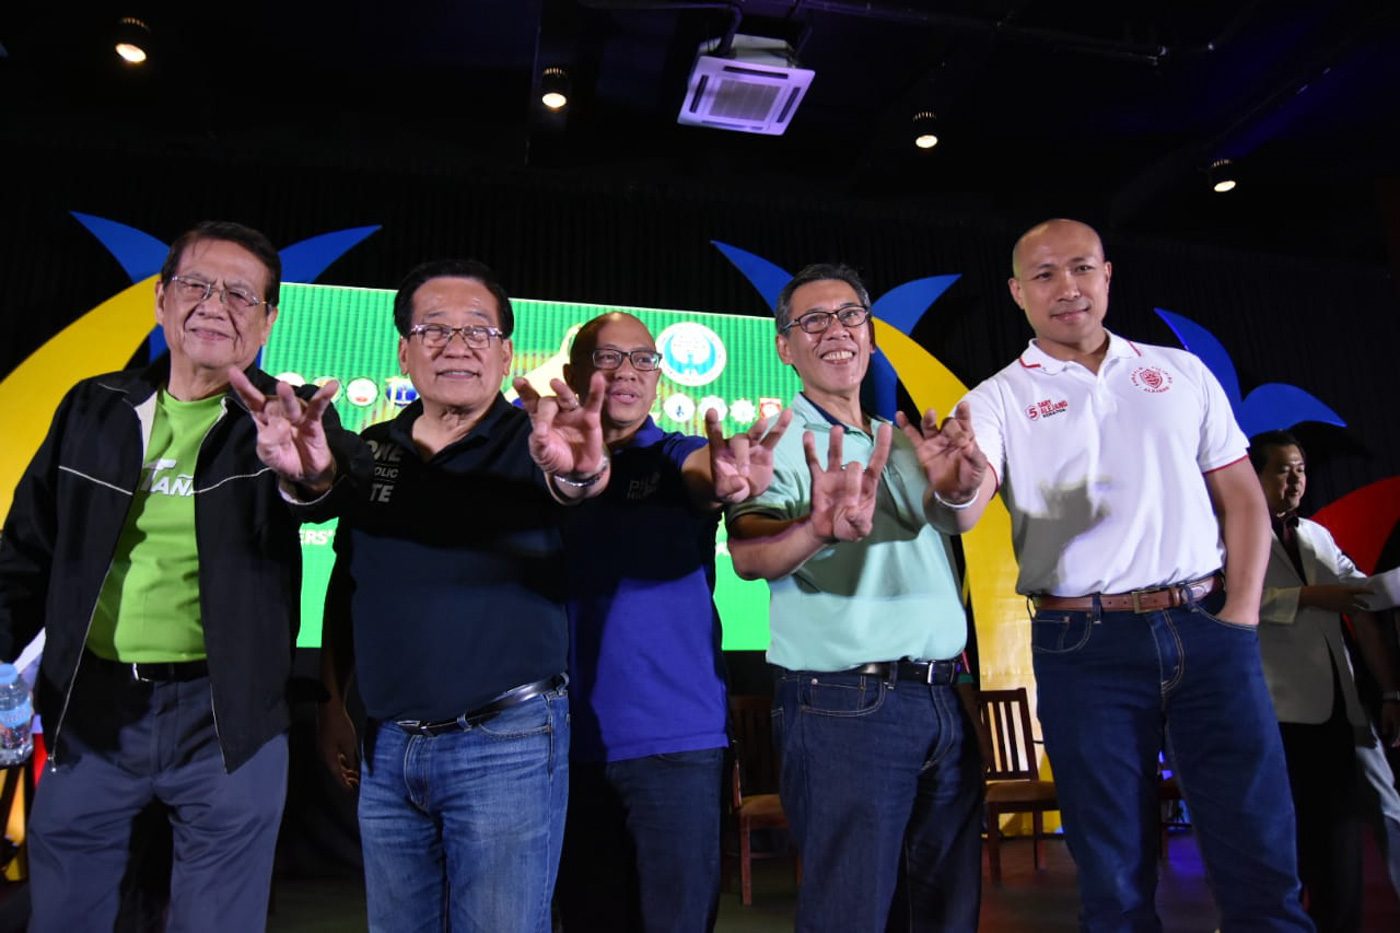 Otso Diretso to ‘work twice as hard’ to pull up survey numbers